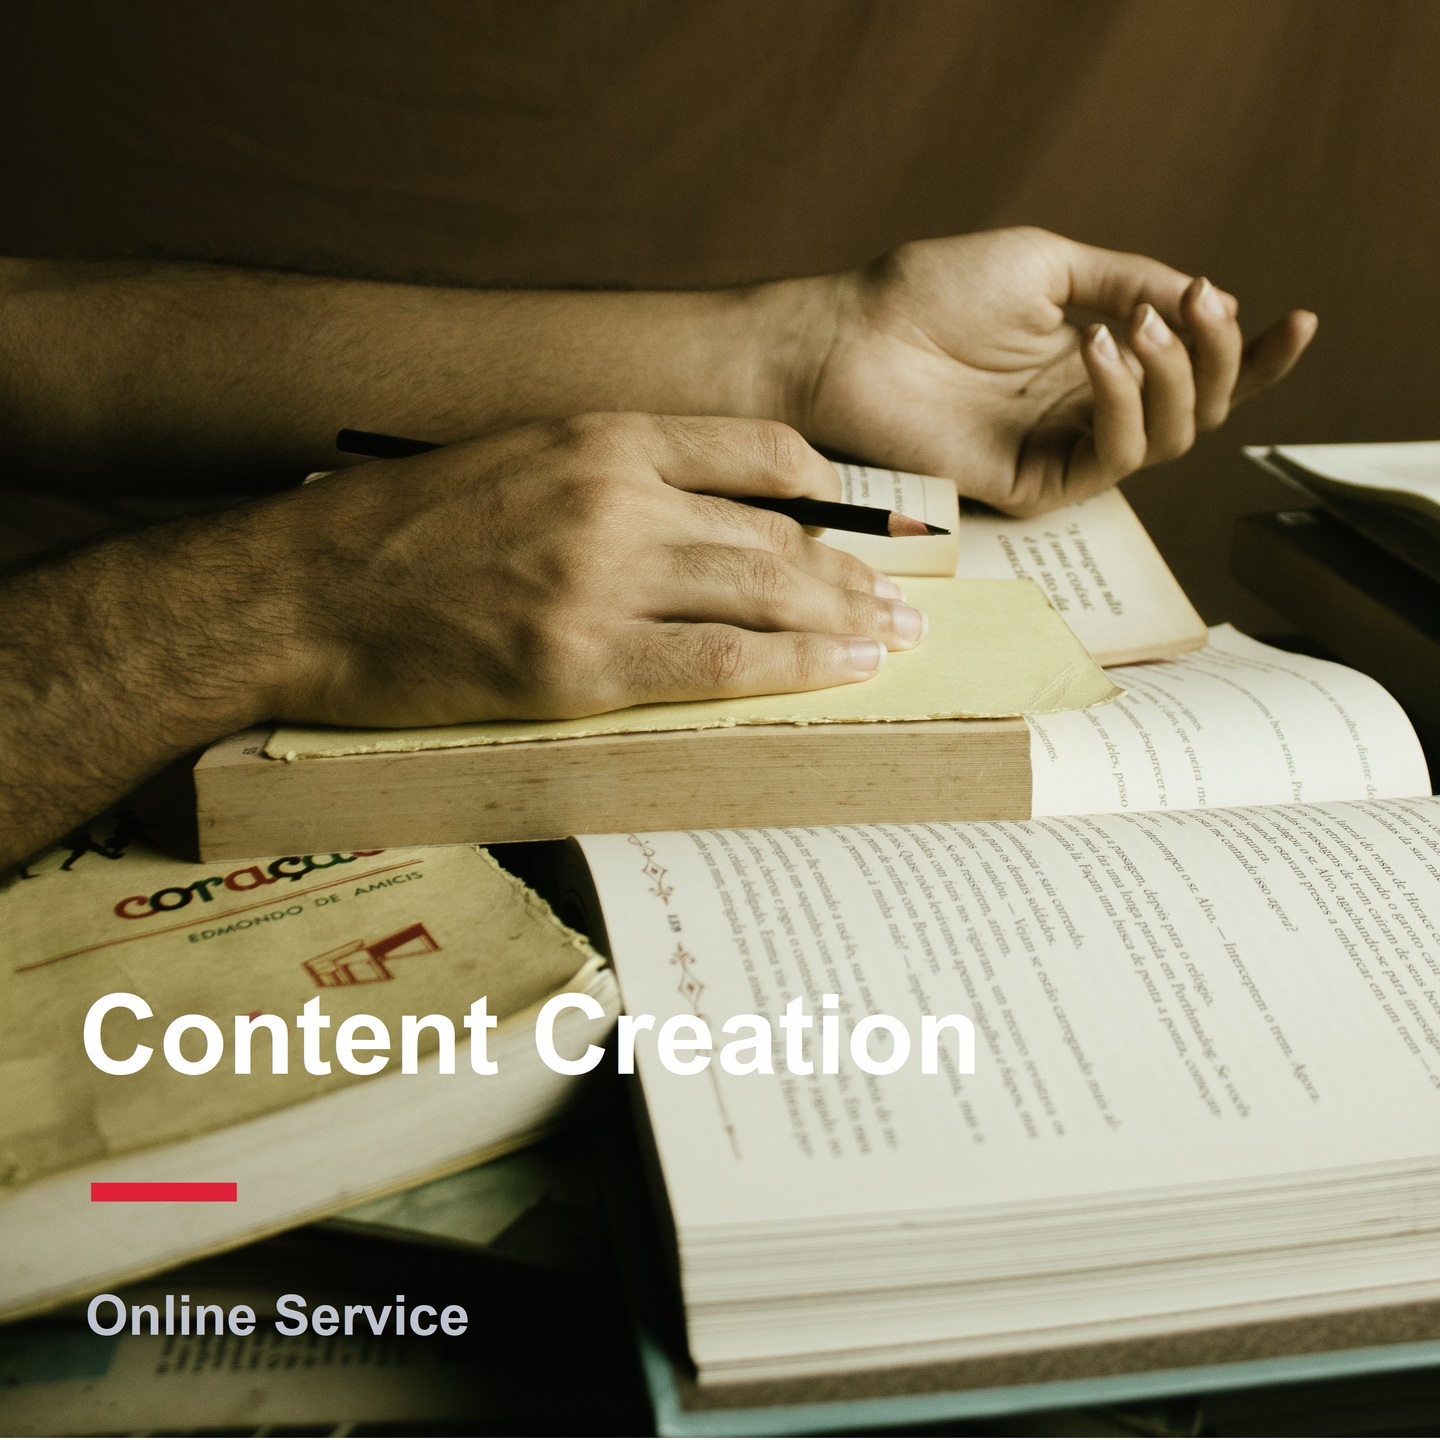 Content Creation 1251-2500 words, up to 8 pages